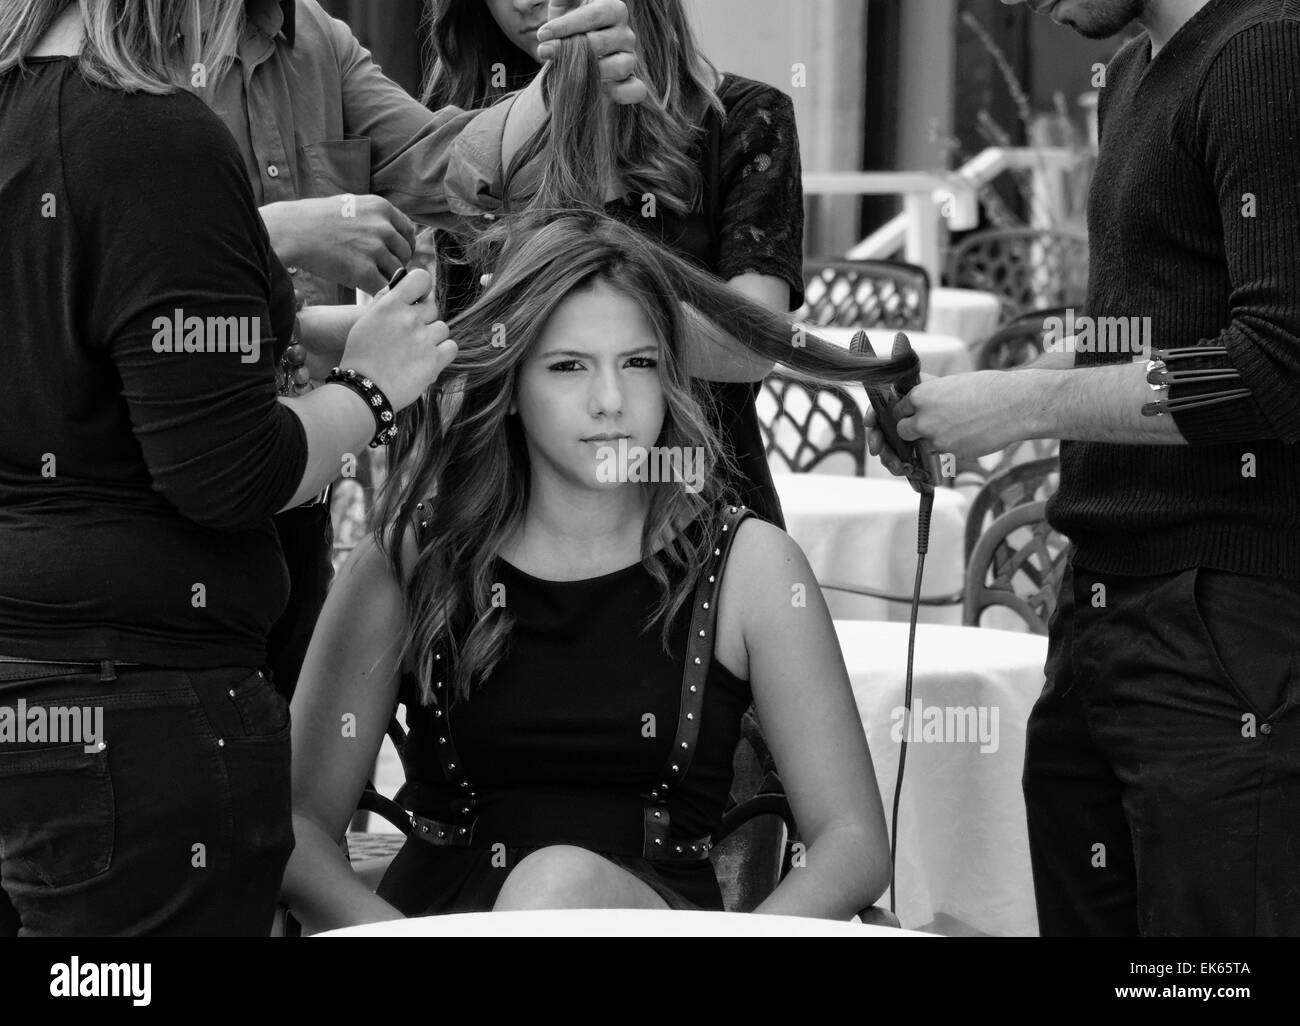 Italy, Sicily, young girl having her hair combed by hairdressers Stock Photo